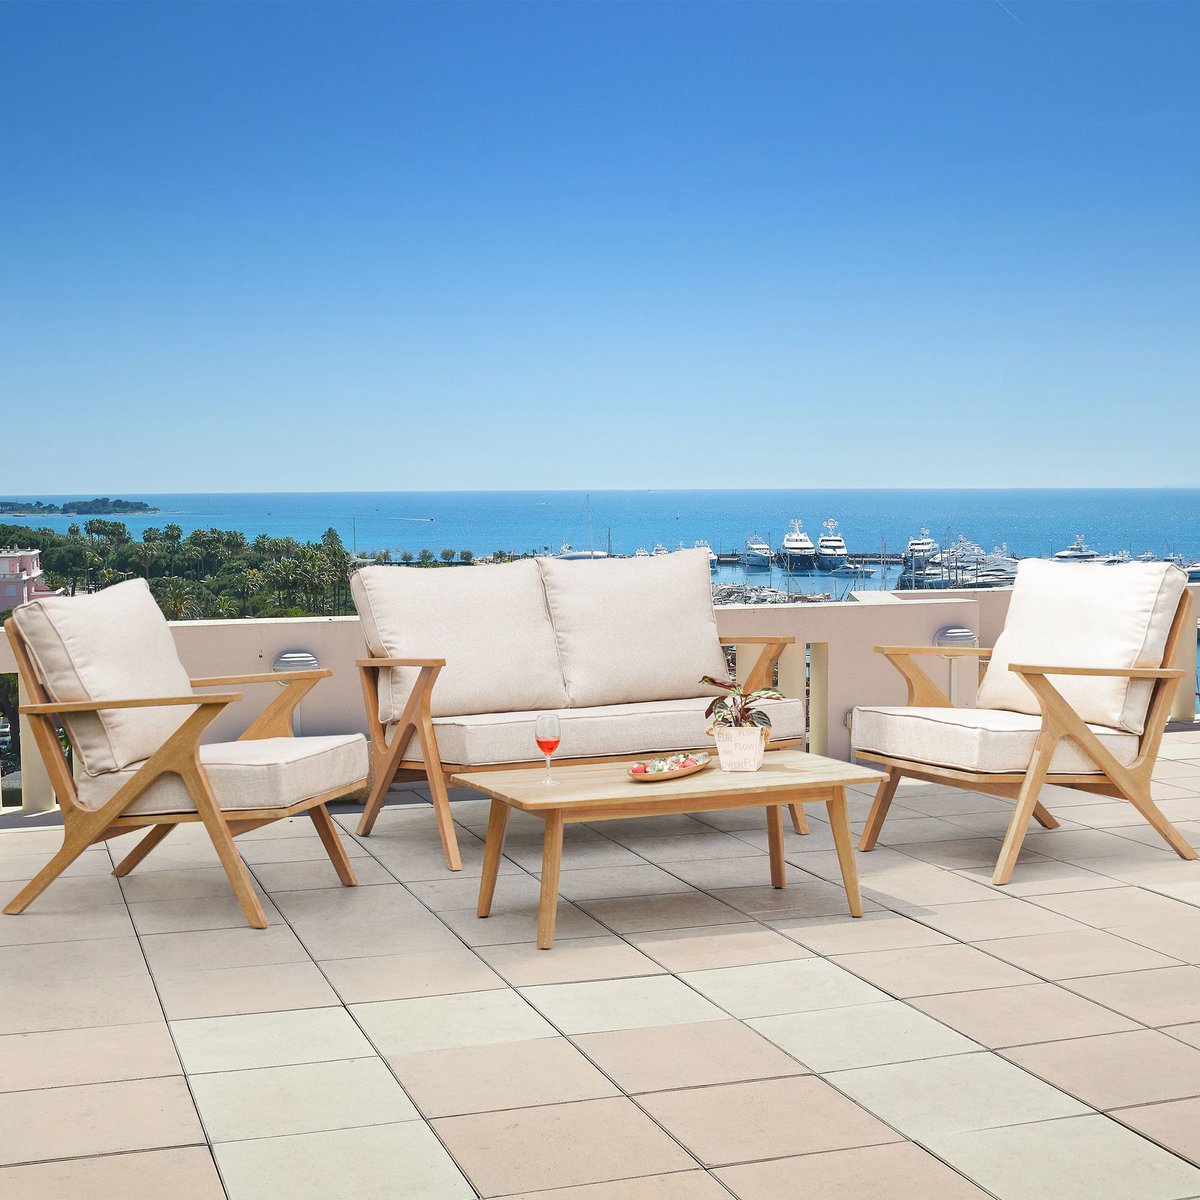 Transform your outdoor space into a paradise with our stunning furniture set from buff.ly/4bpuQu3! Elevate your relaxation game with our top-quality pieces that combine style and durability. Shop now and create your own backyard oasis! #outdoorfurniture #patiofurniture